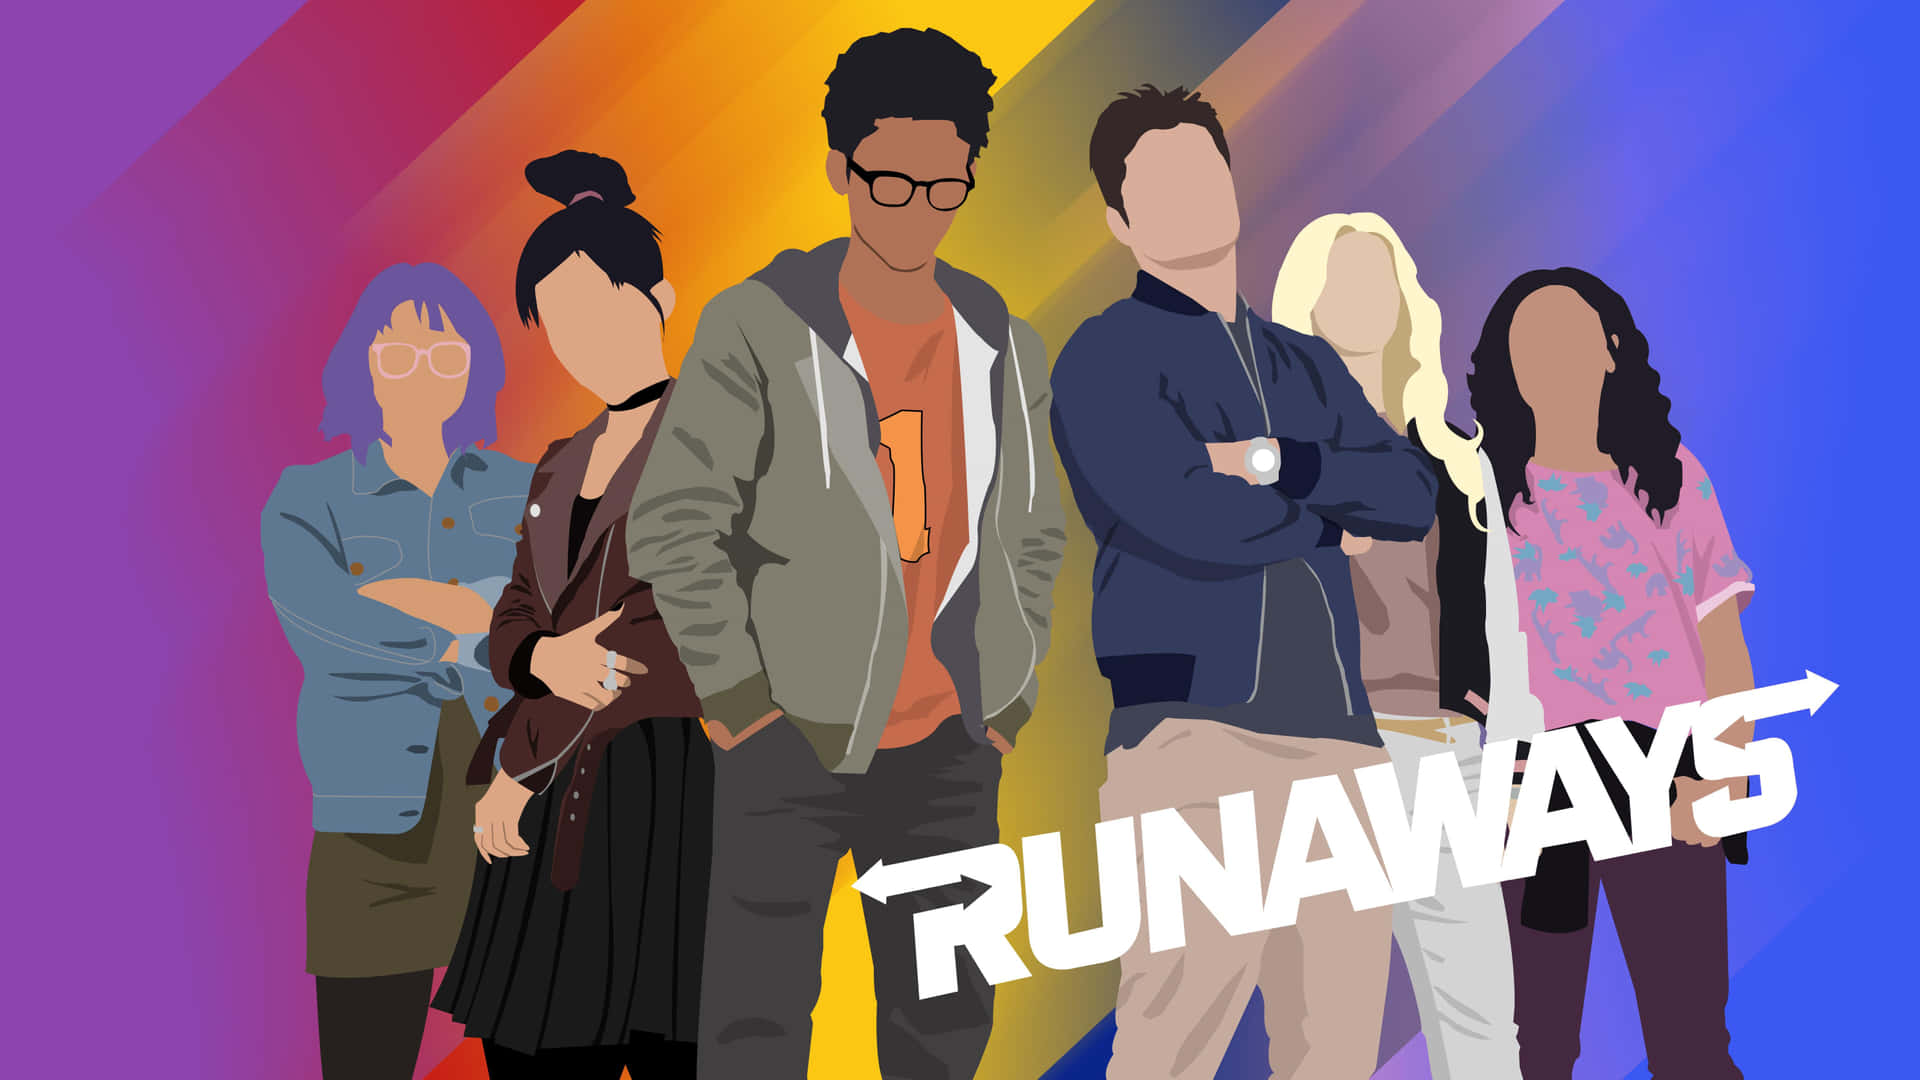 A dynamic group photo of the Runaways team against a dark background Wallpaper